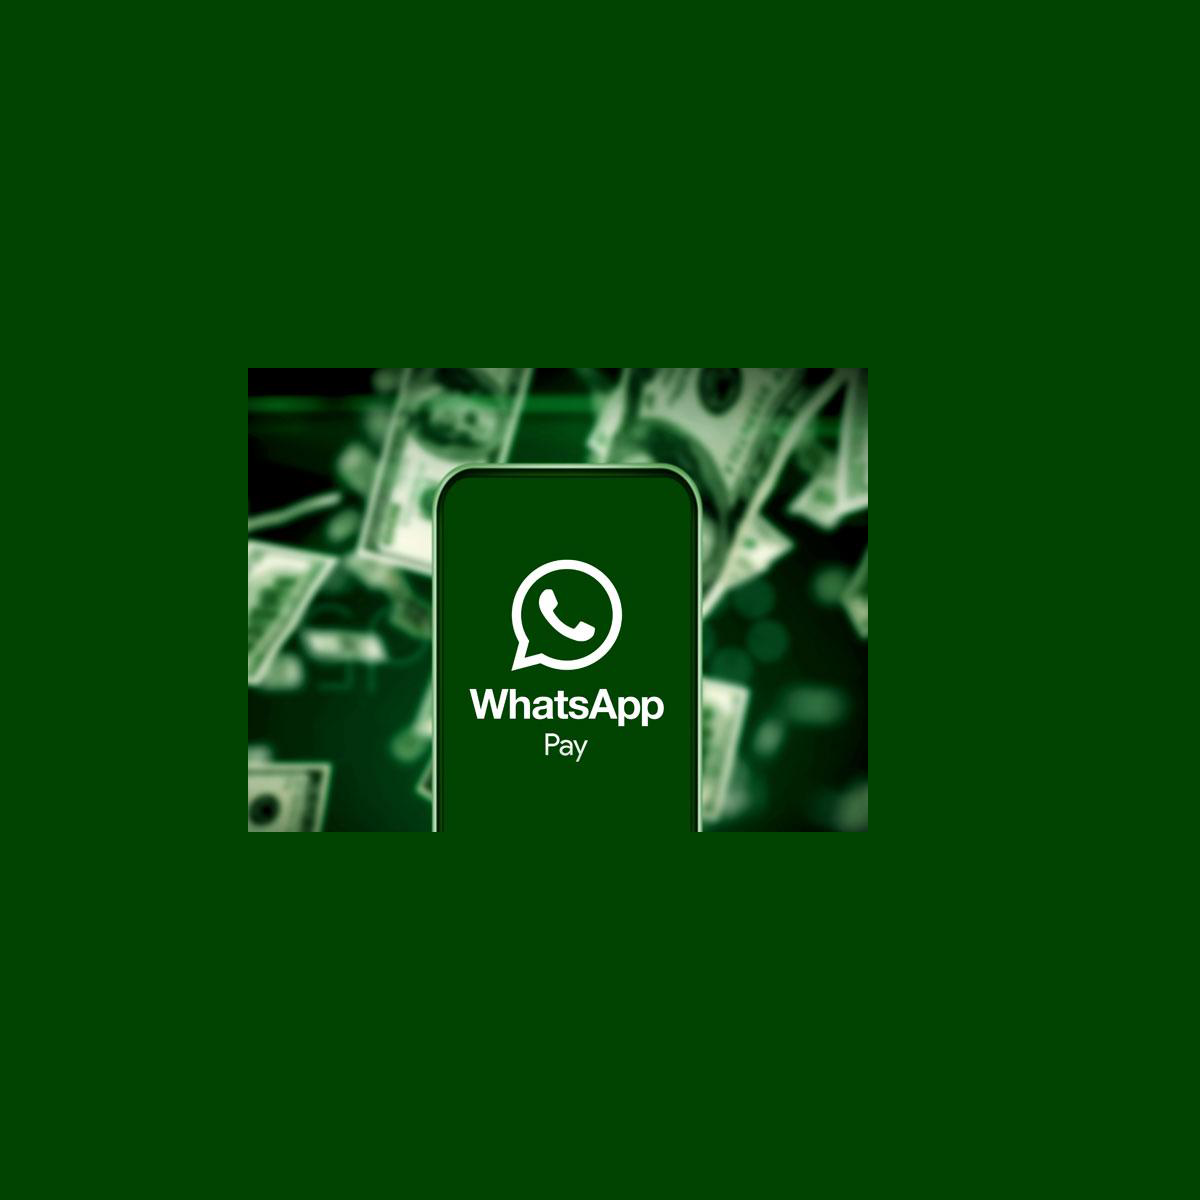 Payment Services On WhatsApp